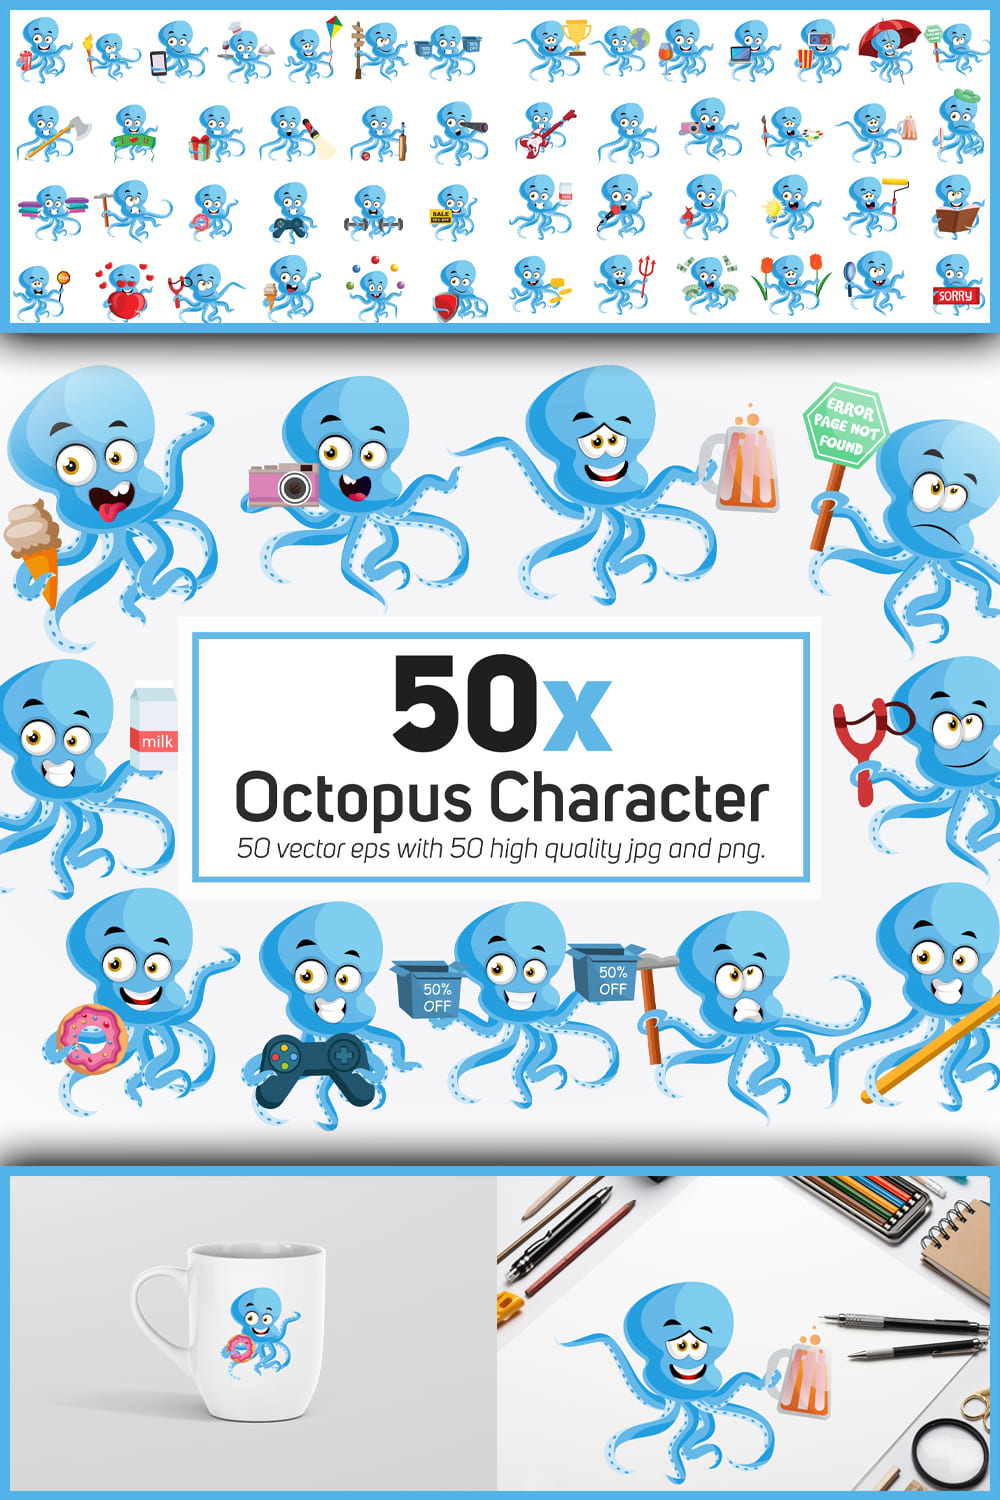 541825 50x octopus character and mascot collection illust pinterest 1000 1500 240